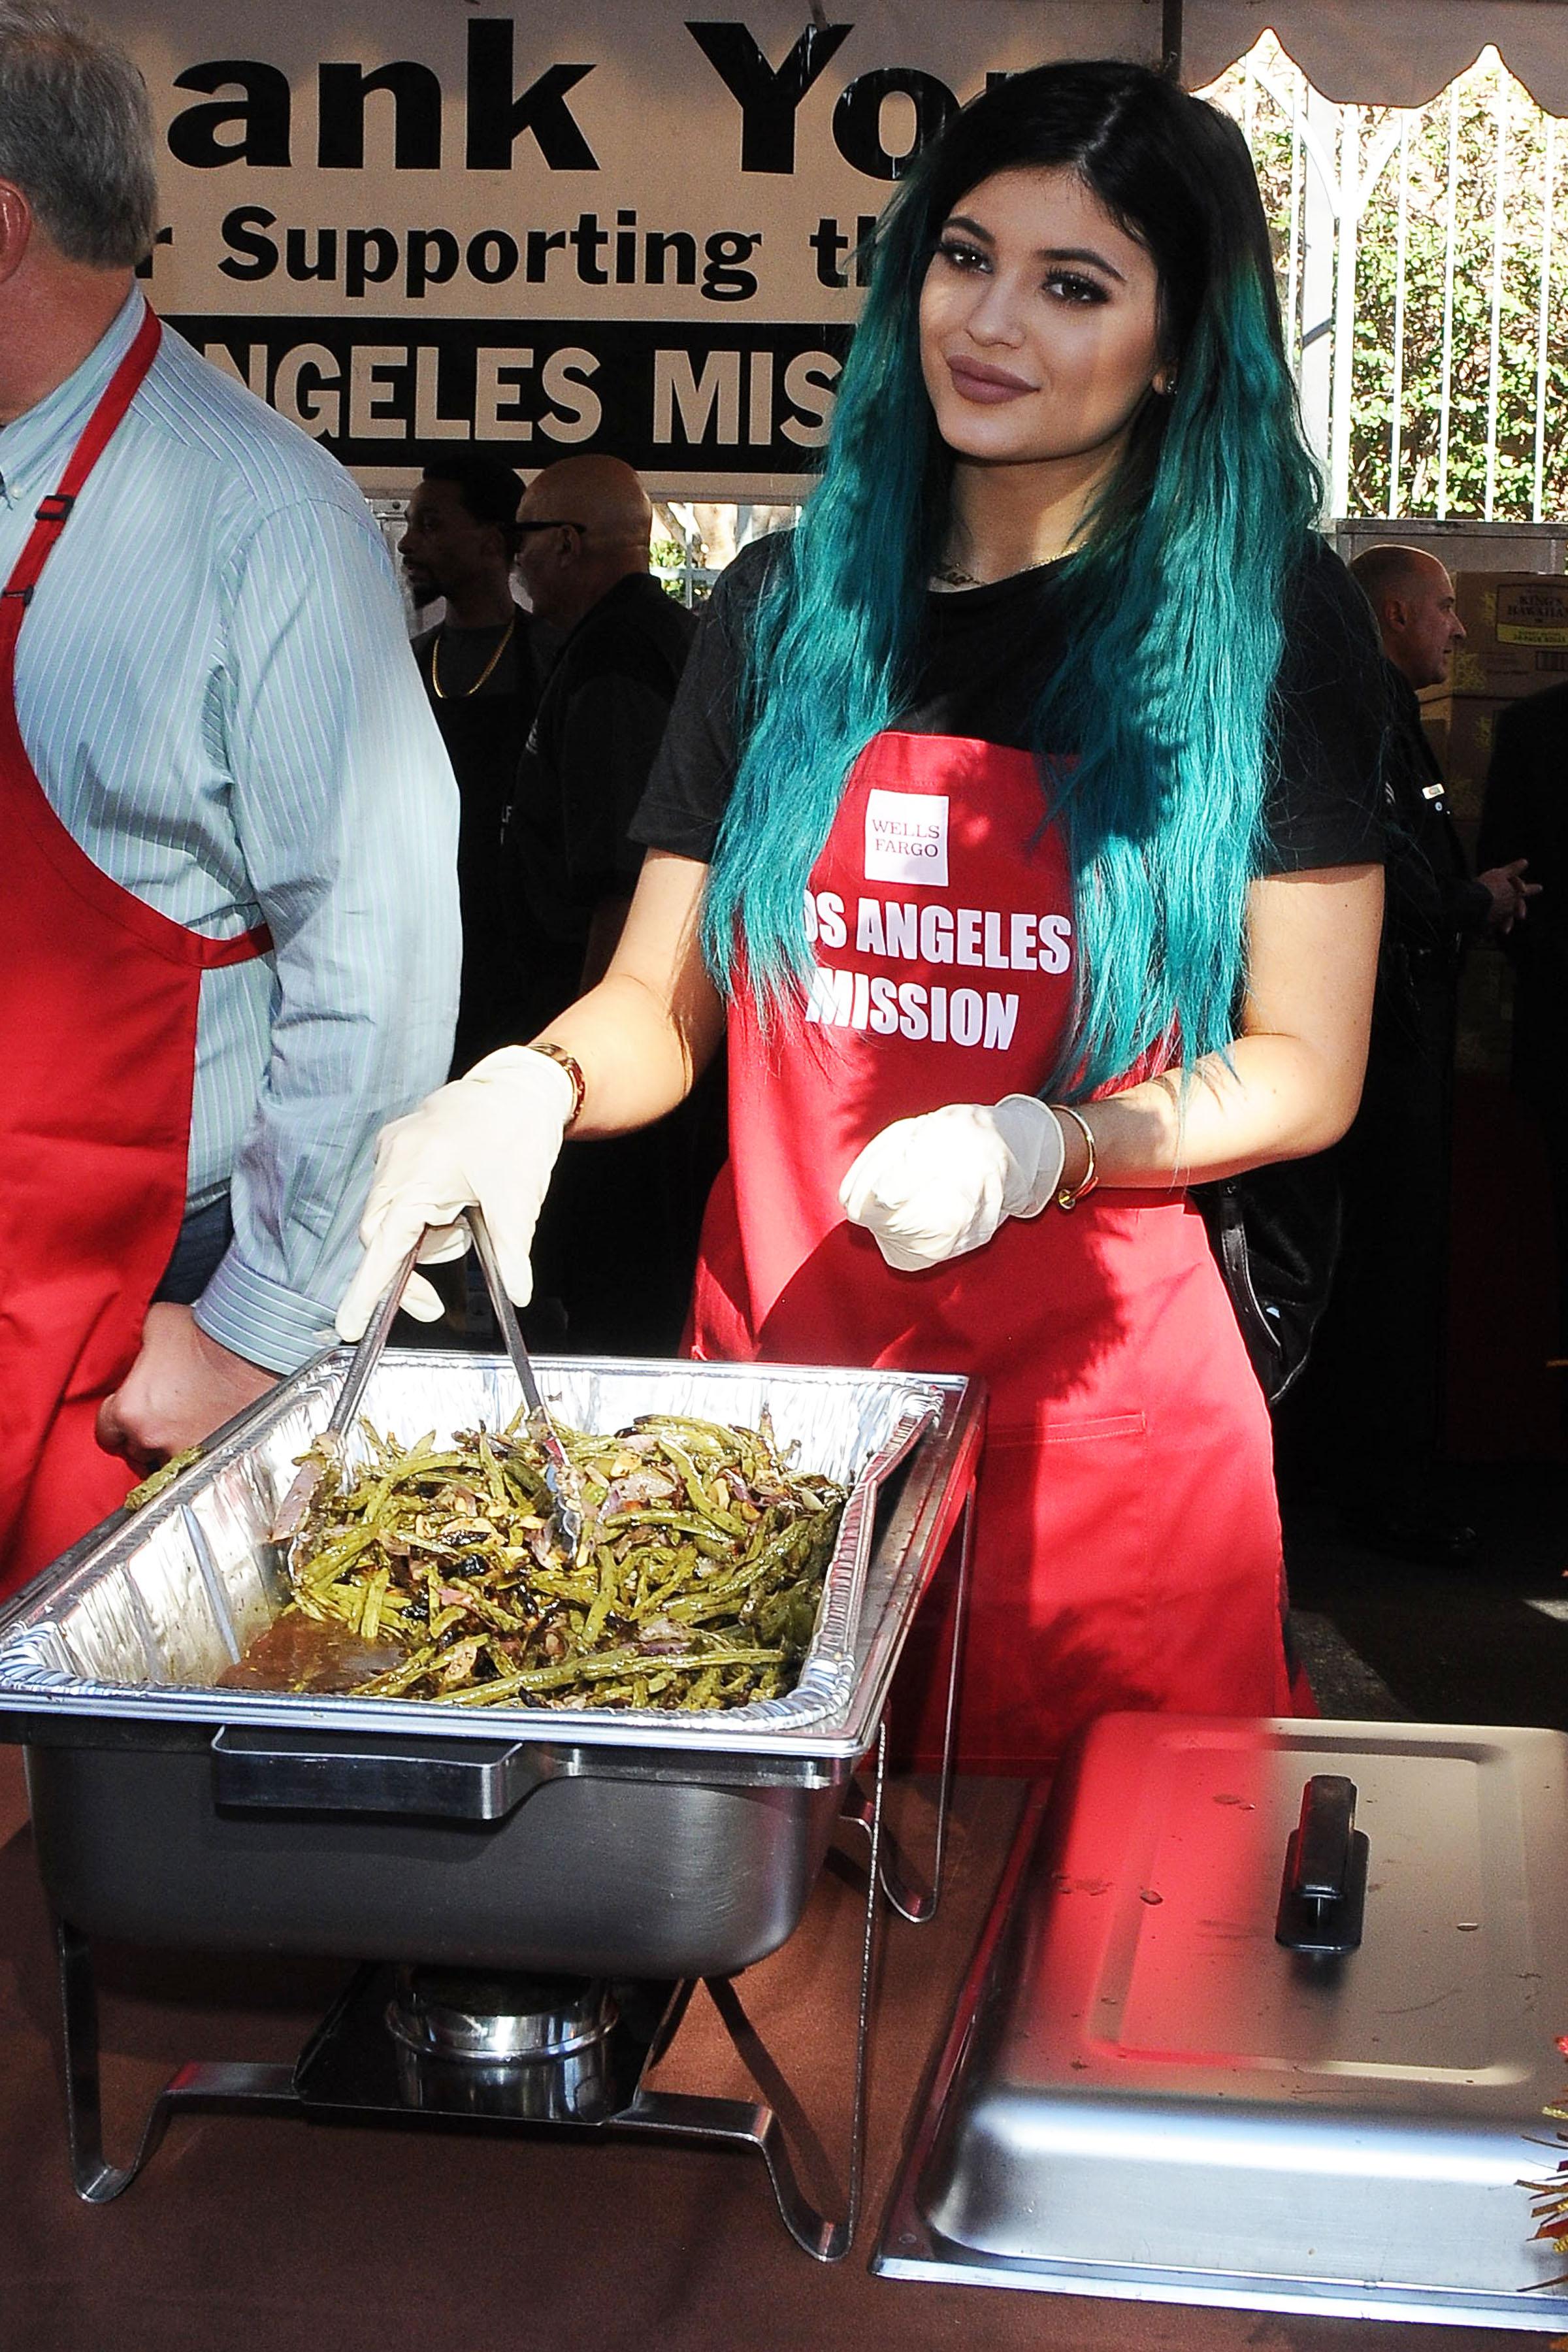 Kylie Jenner and her rumored boyfriend Tyga serve food at Los Angeles Mission